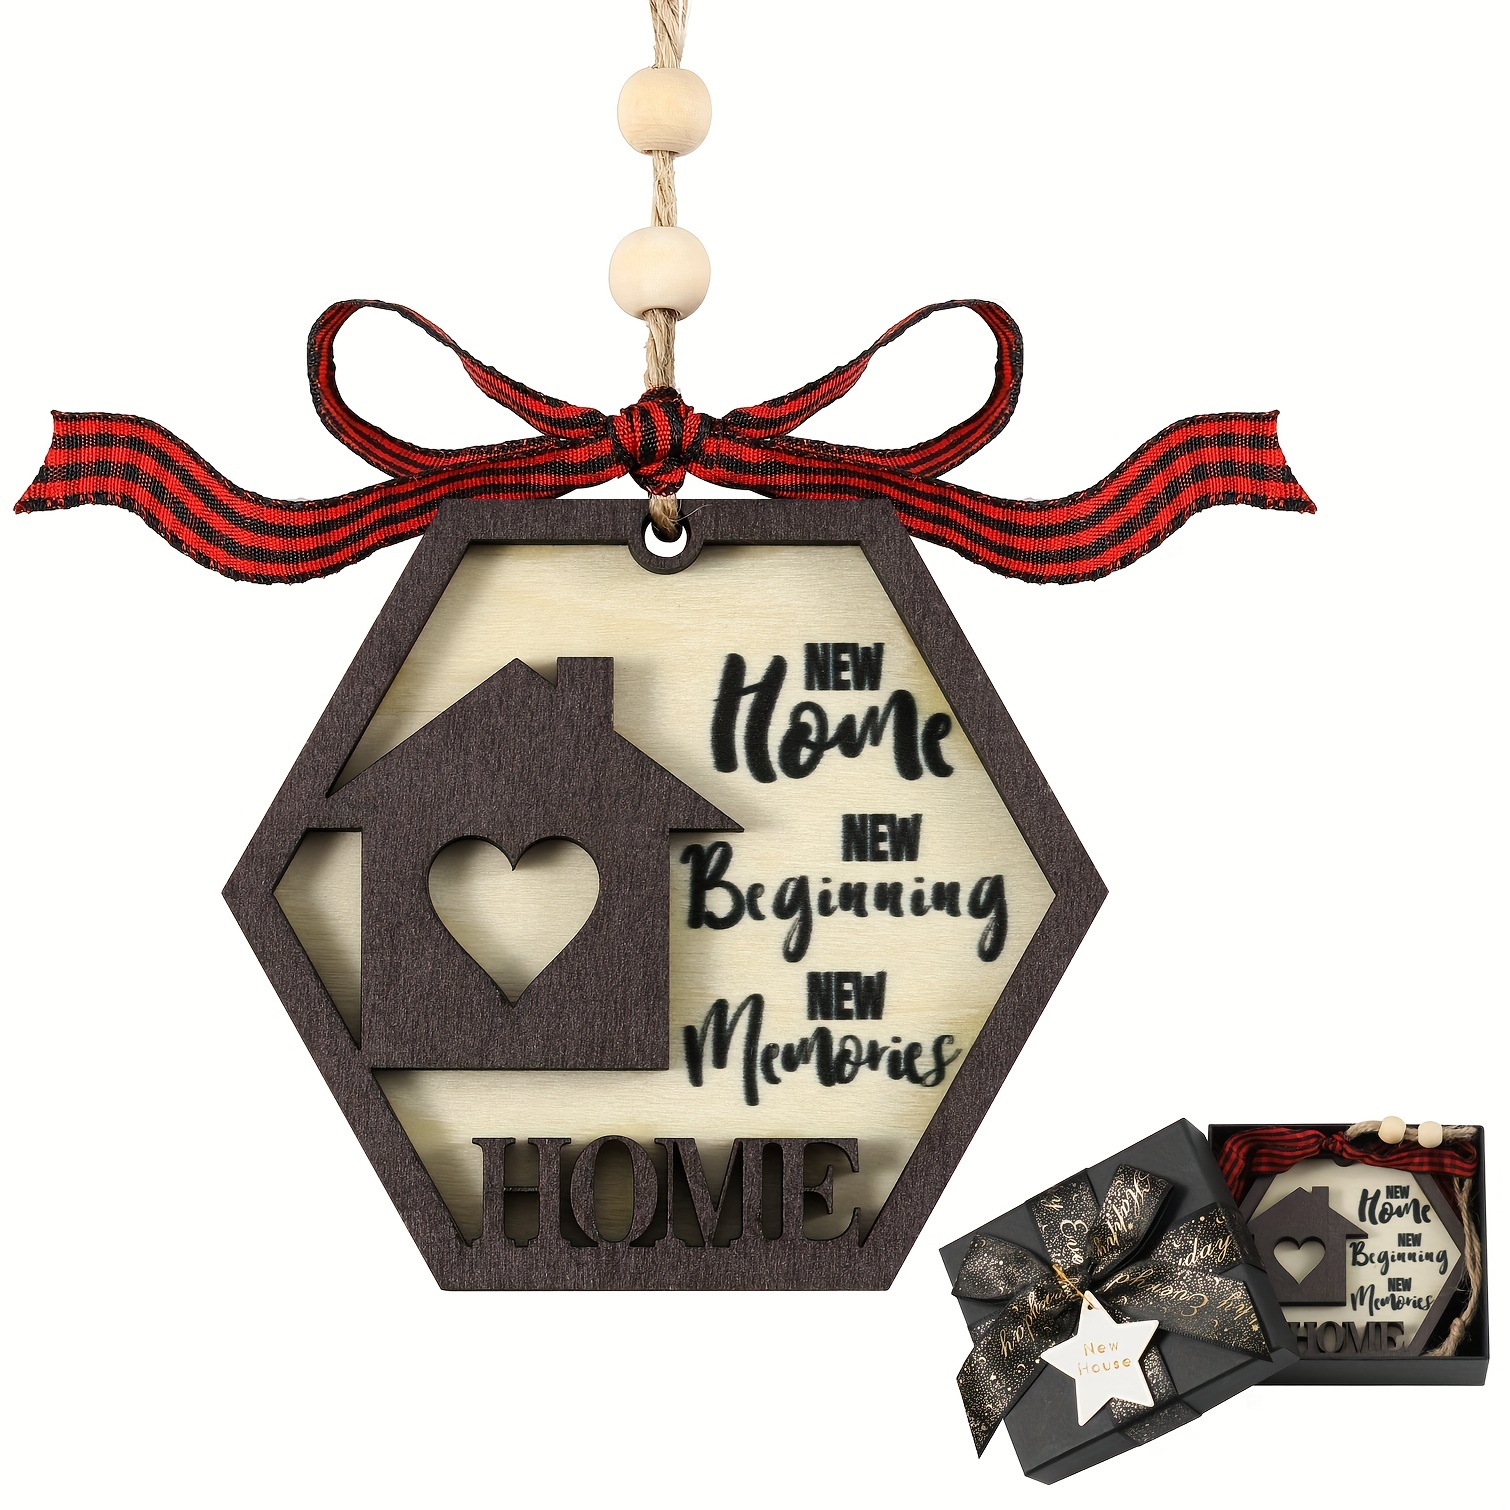  House Warming Gifts New Home - Housewarming Gifts for